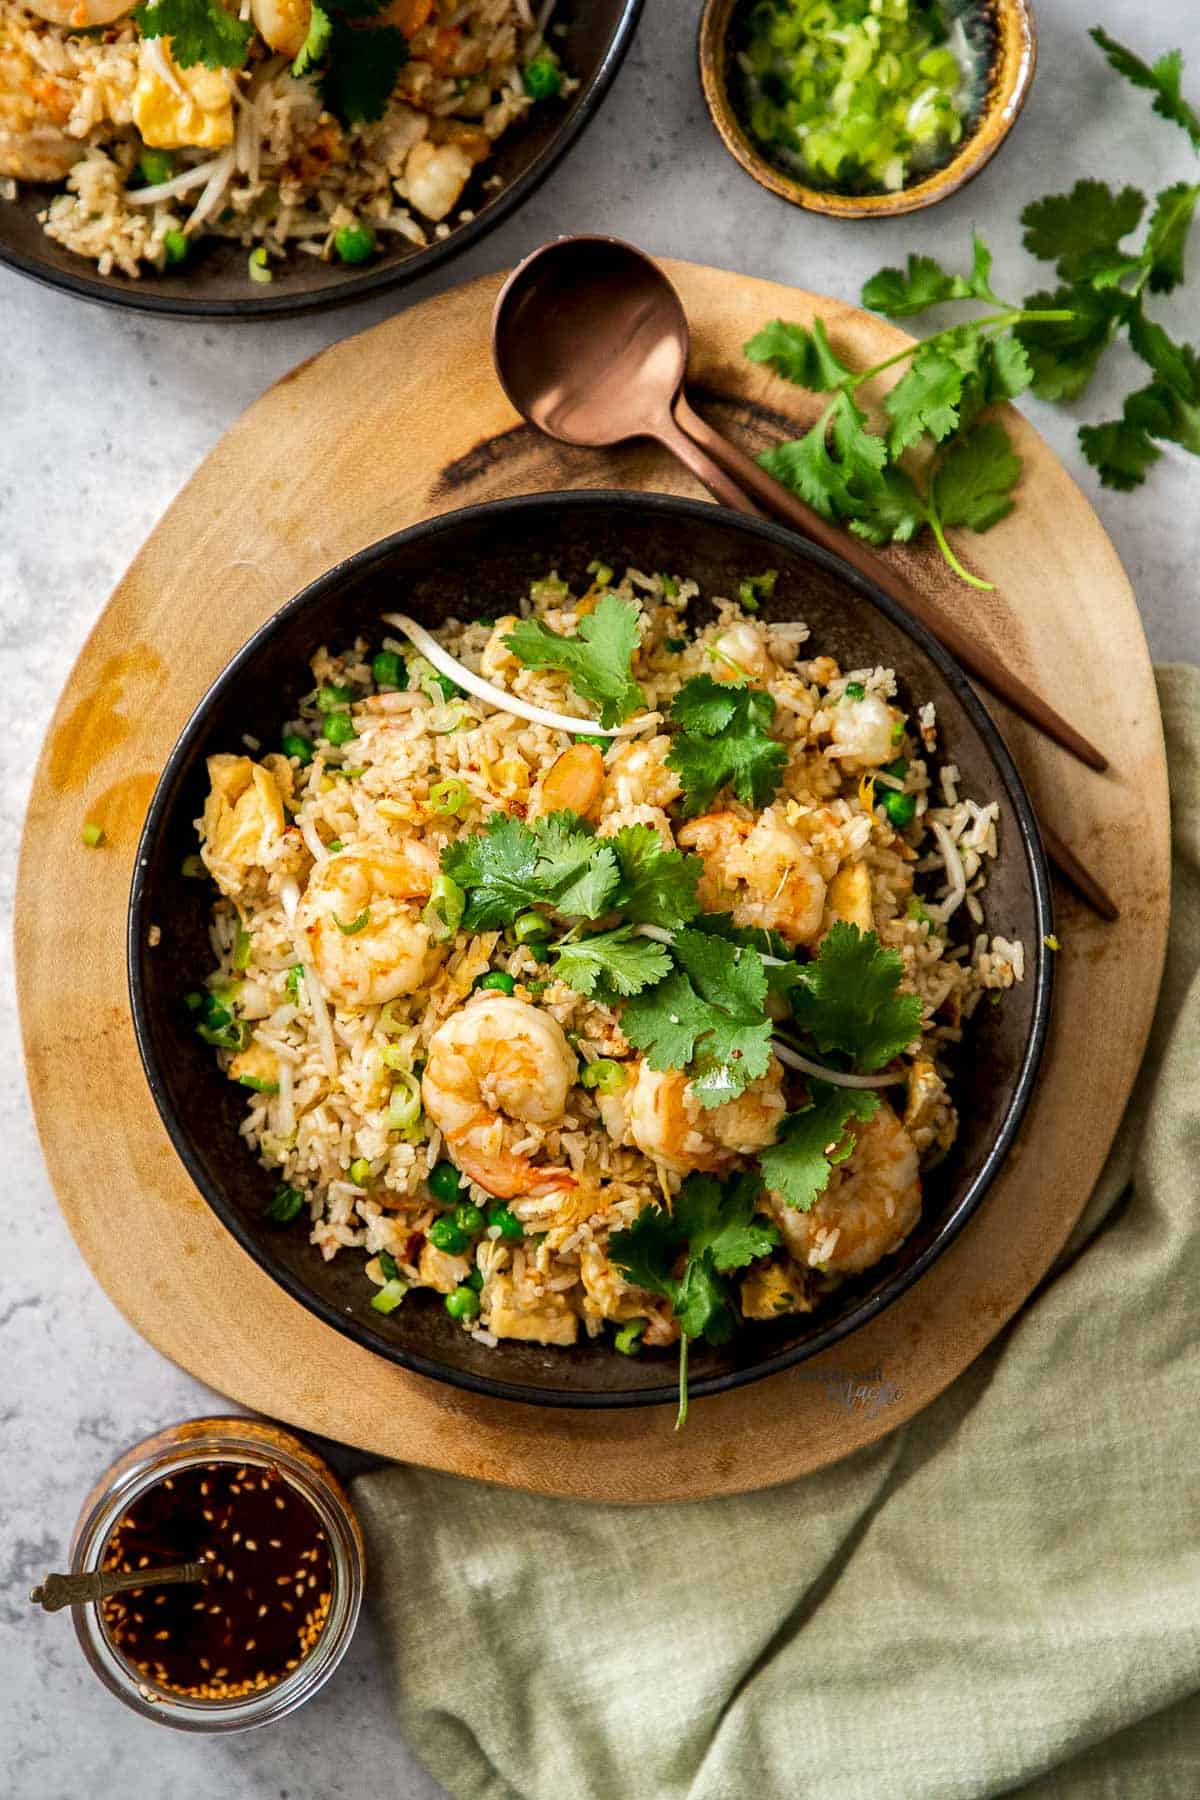 Chinese Prawn Fried Rice topped with cilantro leaves in a round black bowl on top of a wooden board with a copper spoon on the side, and a side of sauce and toppings and a linen napkin in small bowls on top of a gray surface.